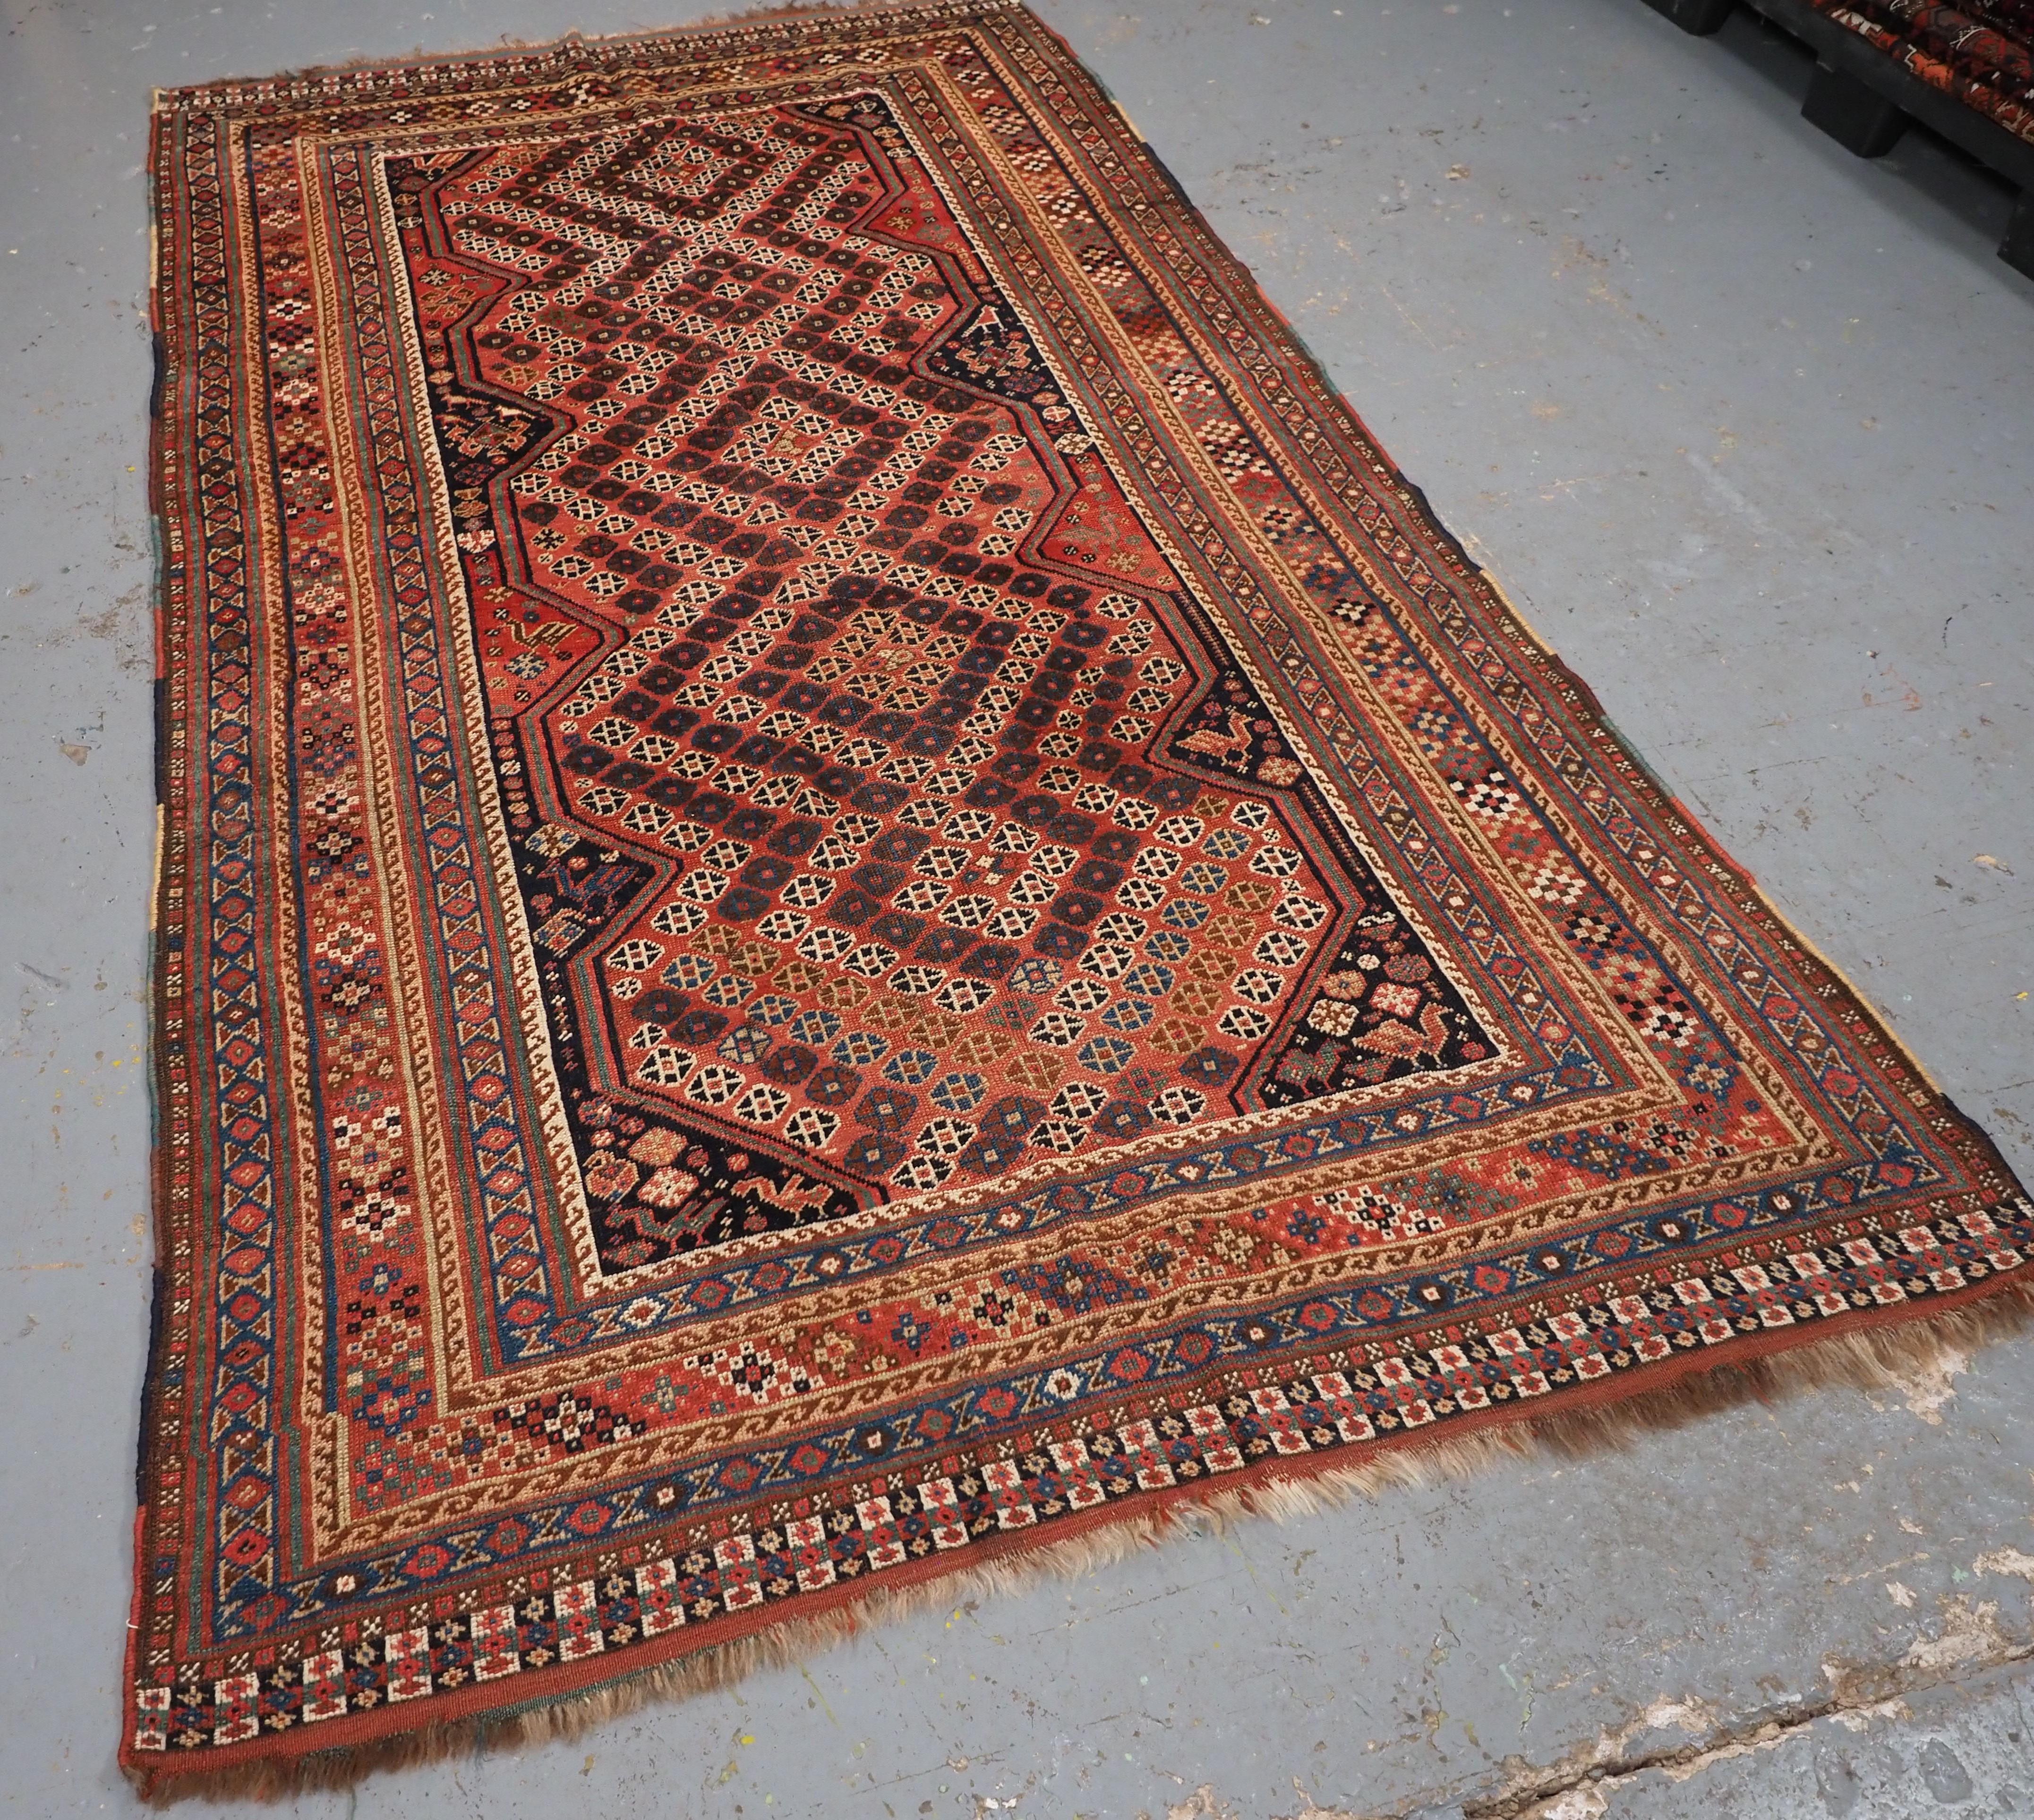 Size: 7ft 11in x 4ft 7in (242 x 140cm).

A good Antique Tribal Qashqai rug with diamond lattice design.

Circa 1880.

An interesting rug with one of the less common Qashqai designs, small diamonds forming a lattice giving the rug a sense of